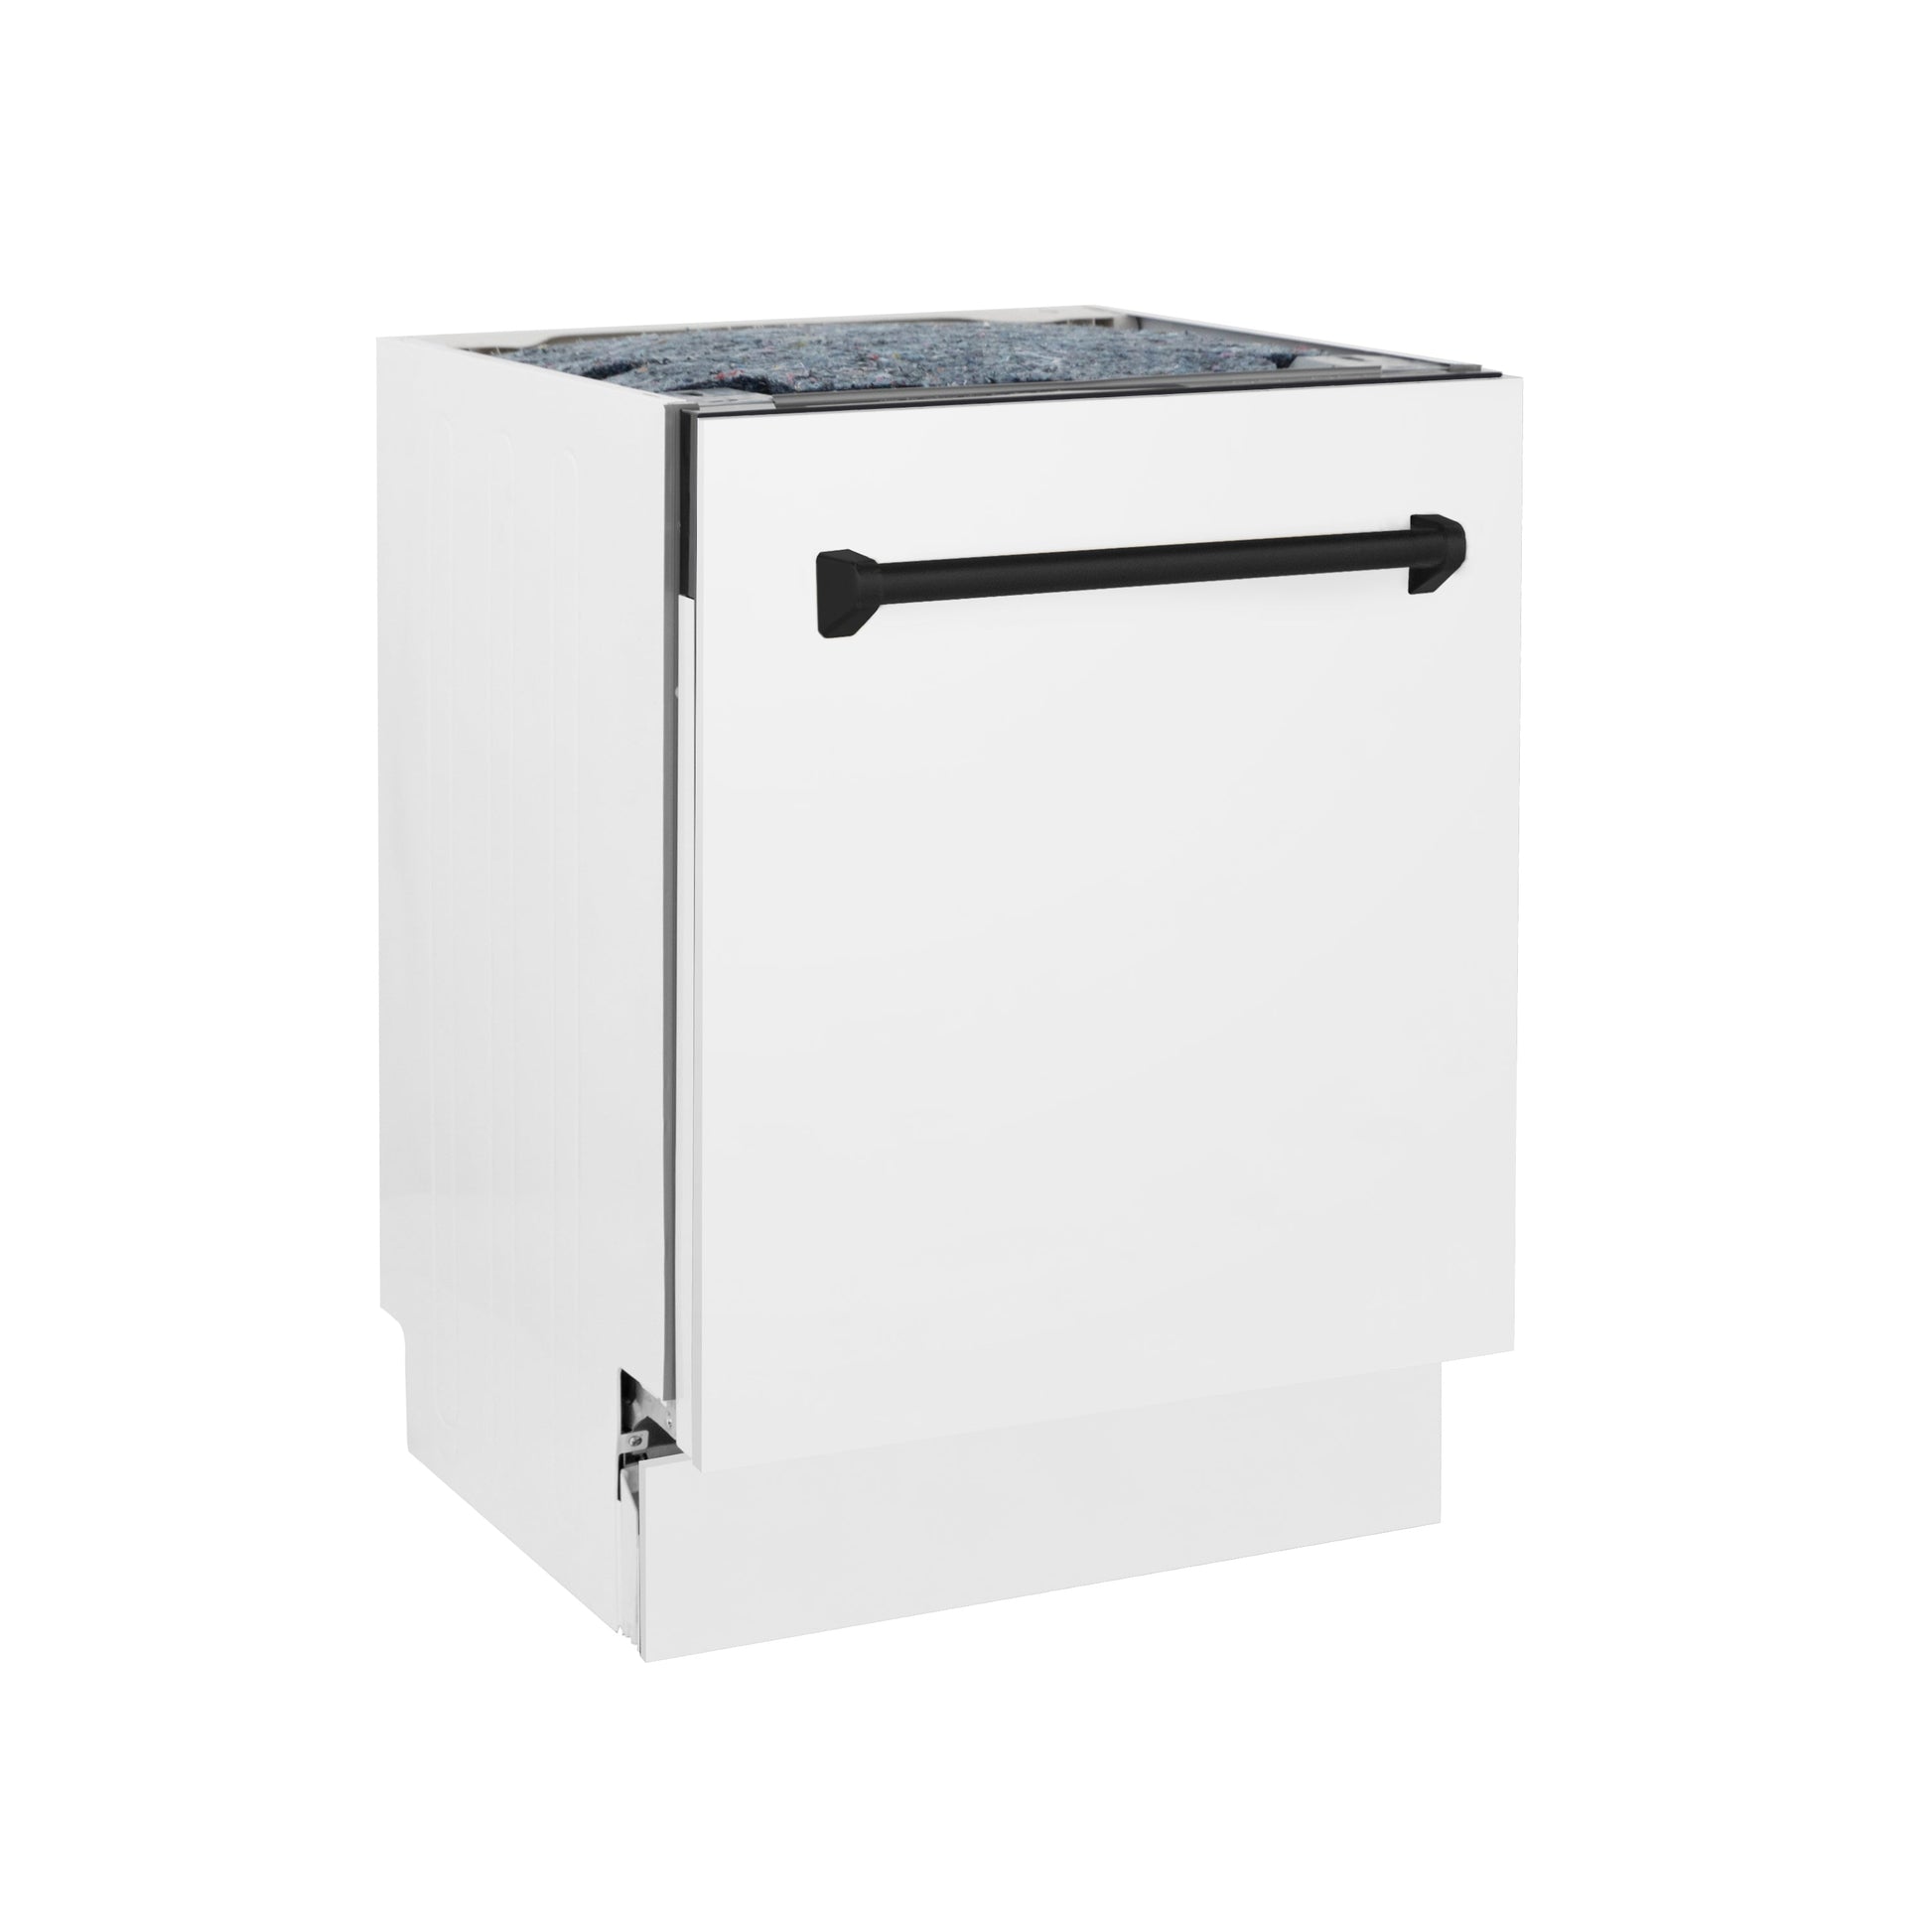 ZLINE Autograph Edition 24 in. Tall Tub Dishwasher in White Matte with Matte Black Handle (DWVZ-WM-24-MB) side, door closed.